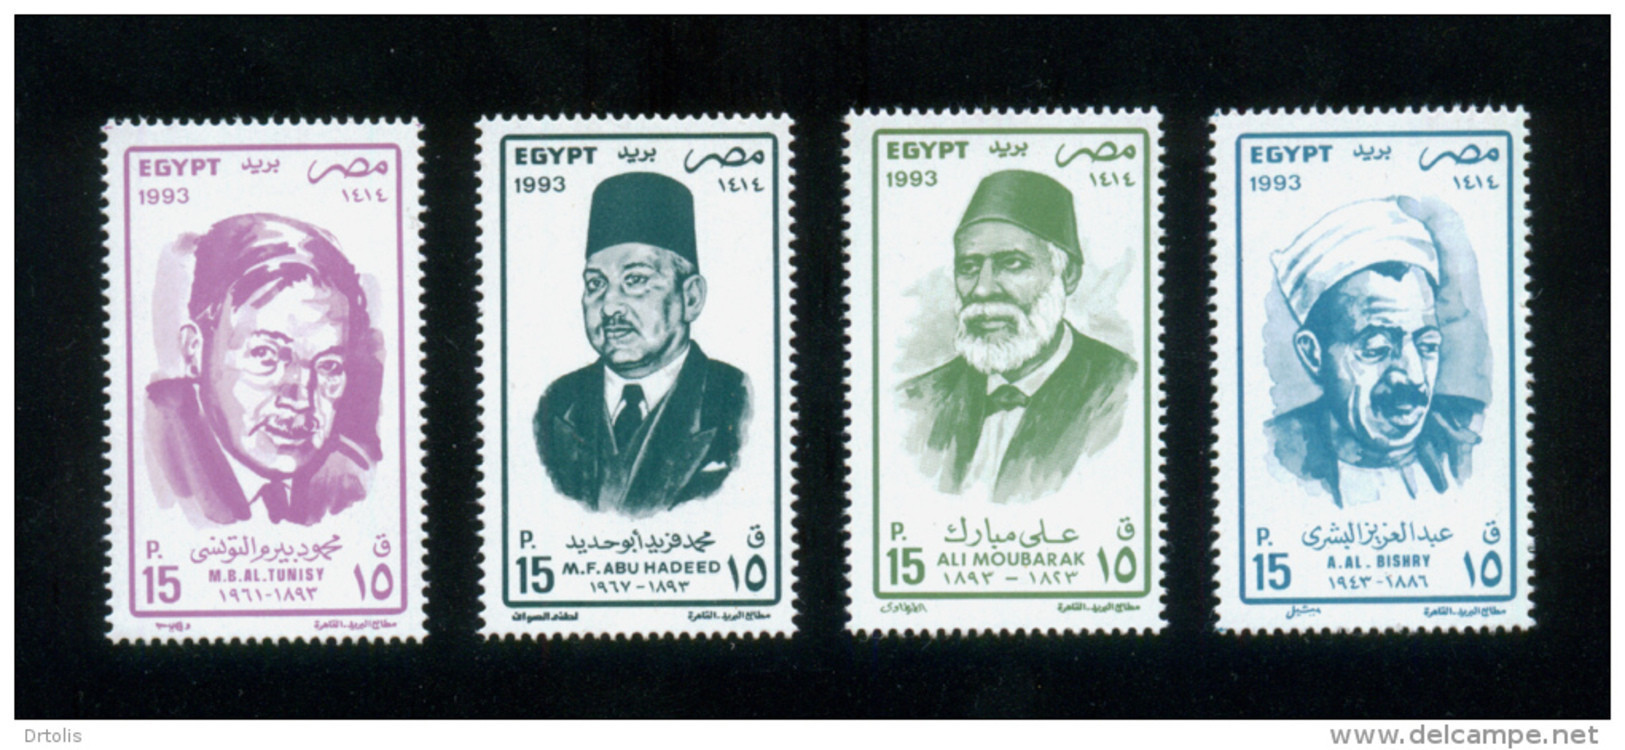 EGYPT / 1993 / COMPLETE YEAR ISSUES / MNH / VF/ 10 SCANS - Unused Stamps